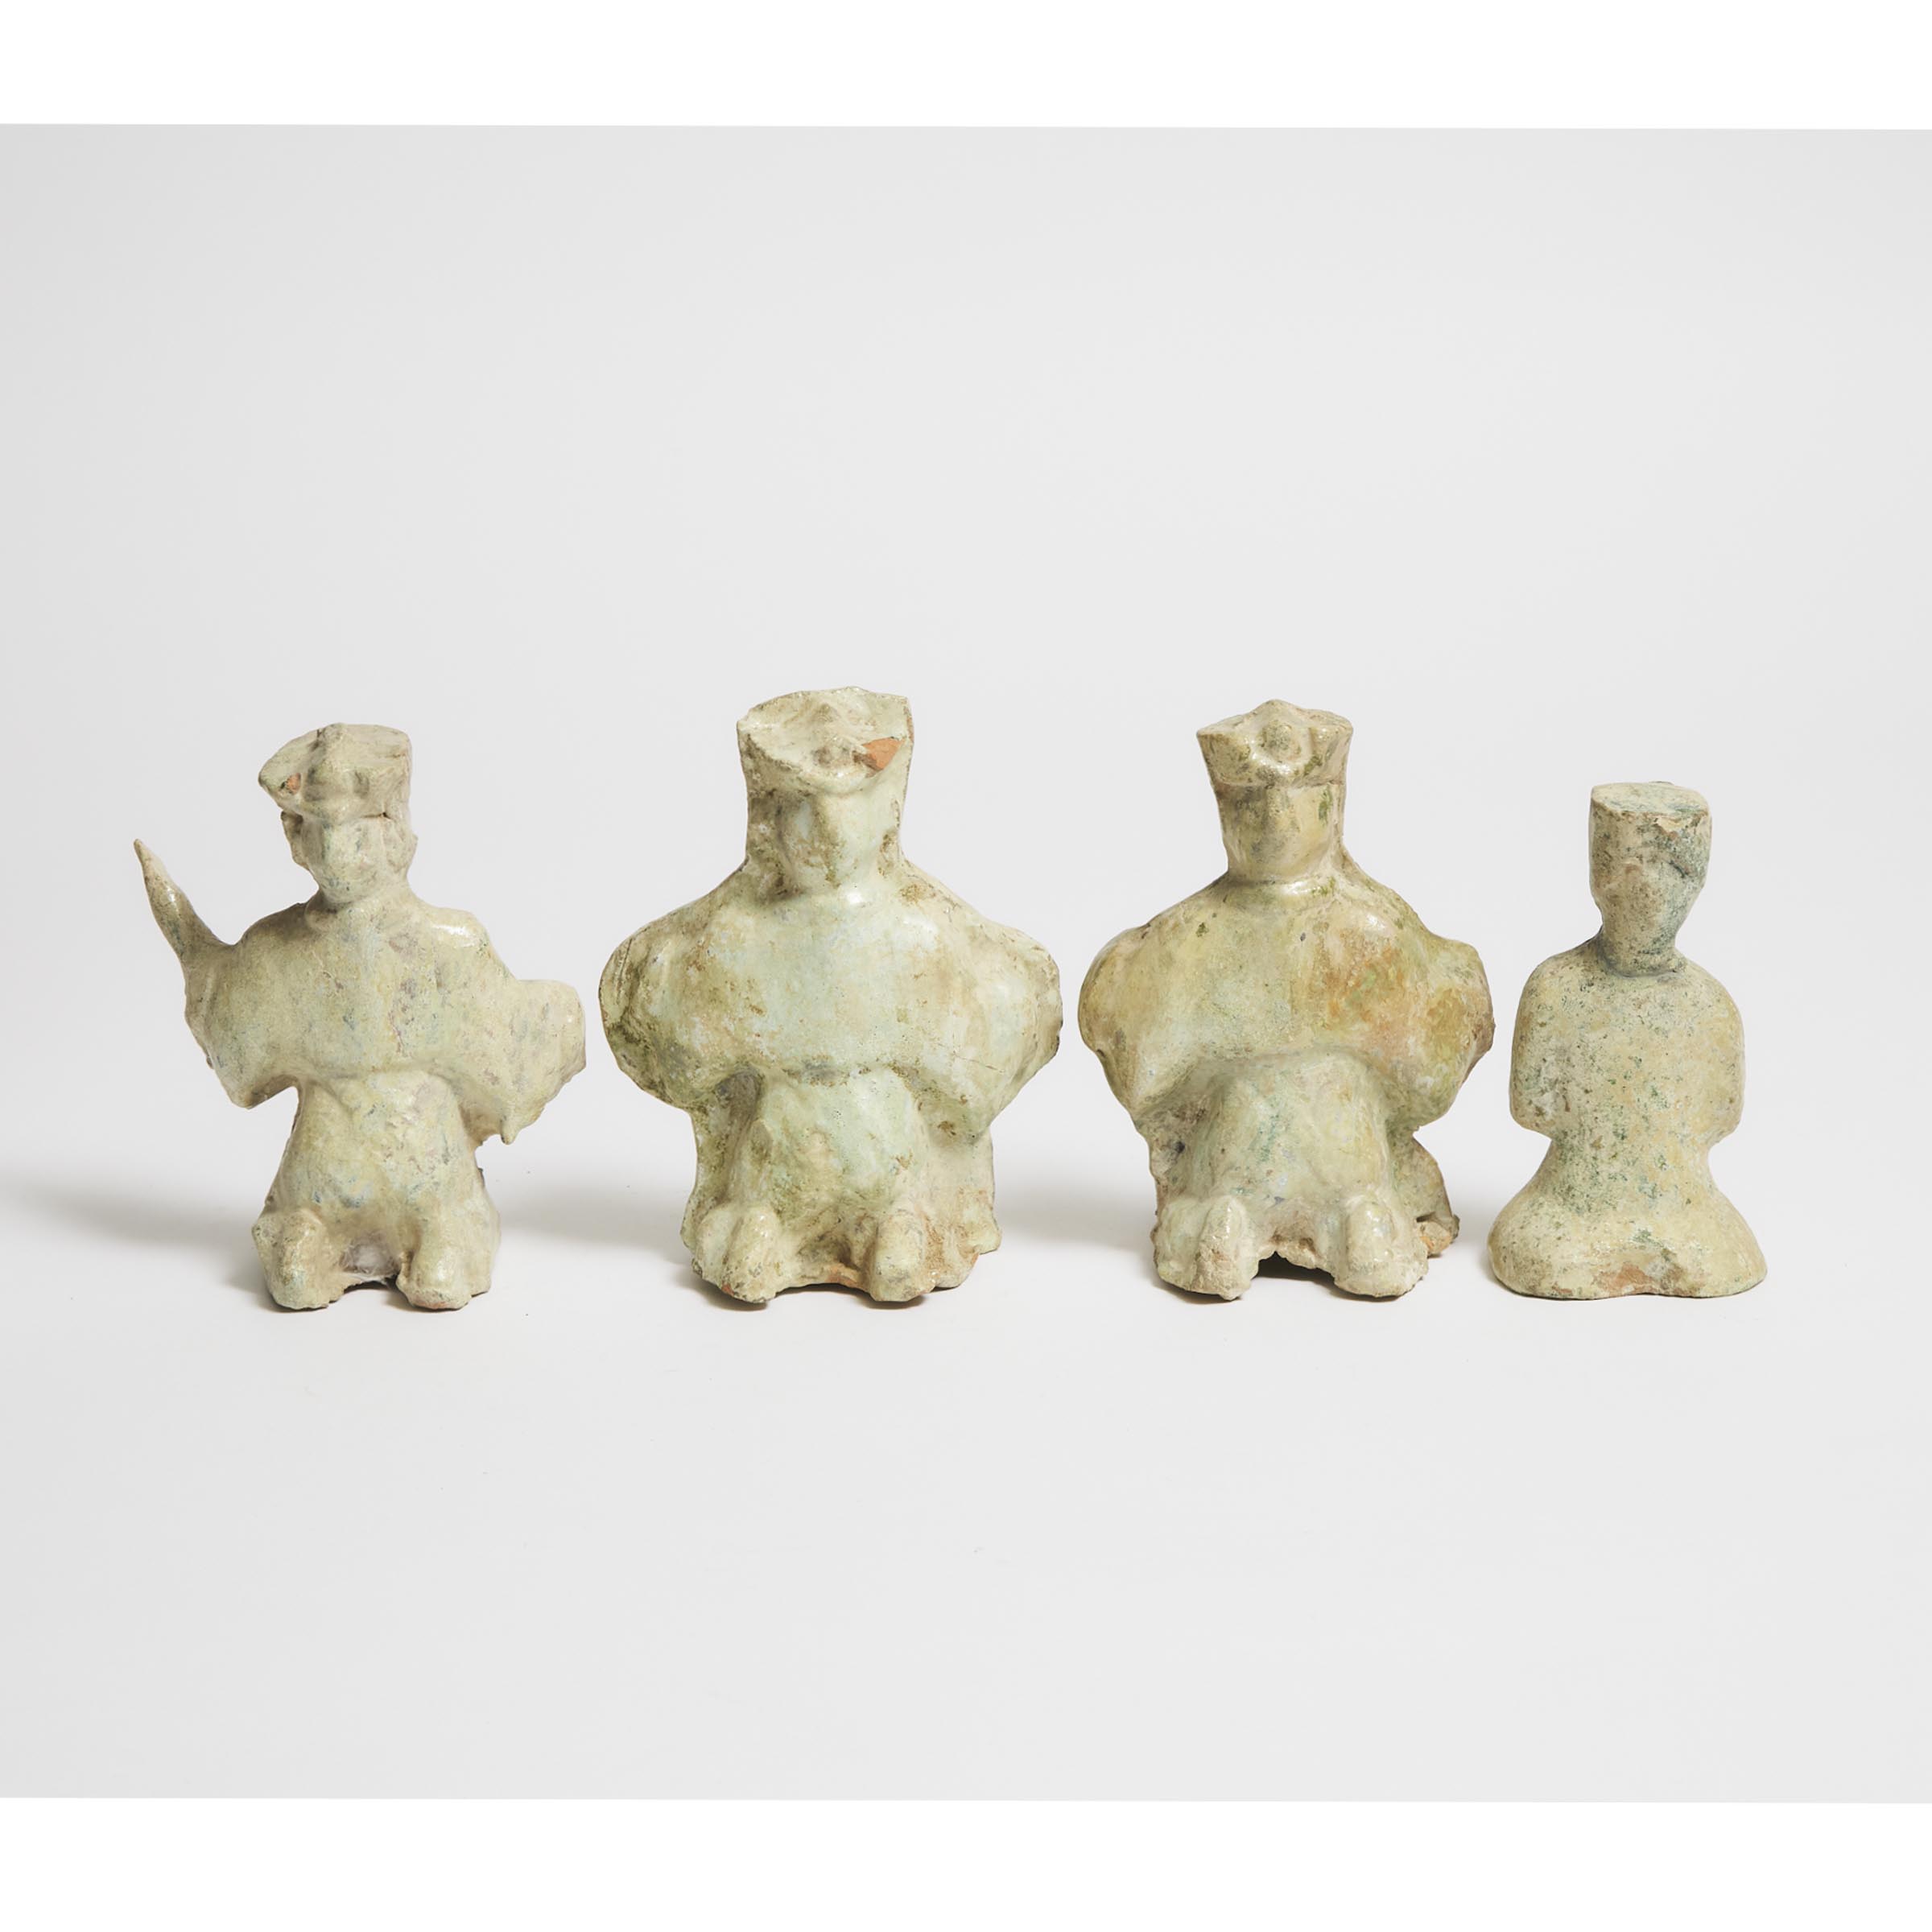 A Group of Four Green-Glazed Pottery Seated Figures, Han Dynasty (206 BC-AD 220)